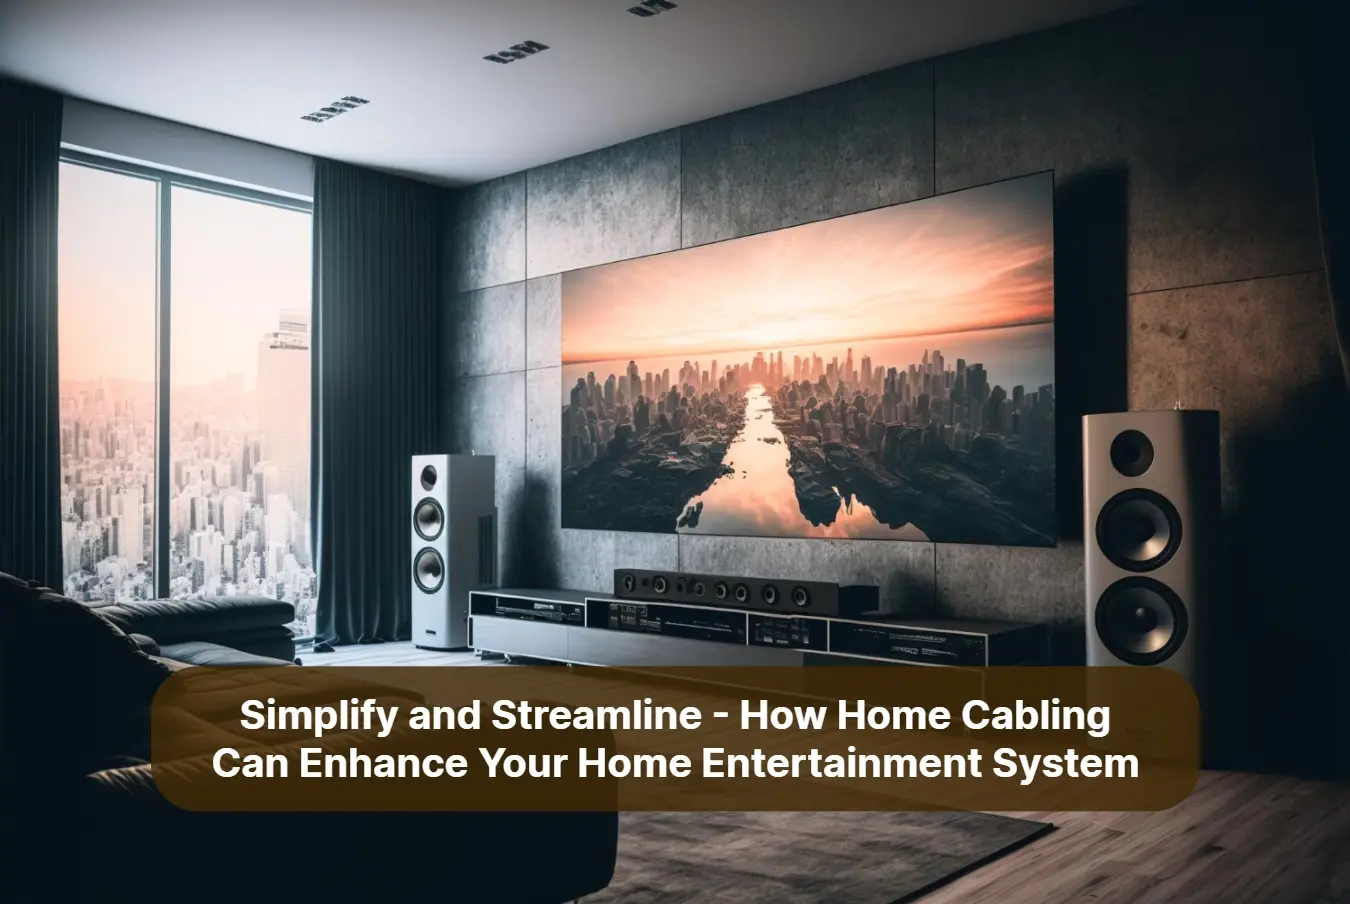 Simplify and Streamline How Home Cabling Can Enhance Your Home Entertainment System